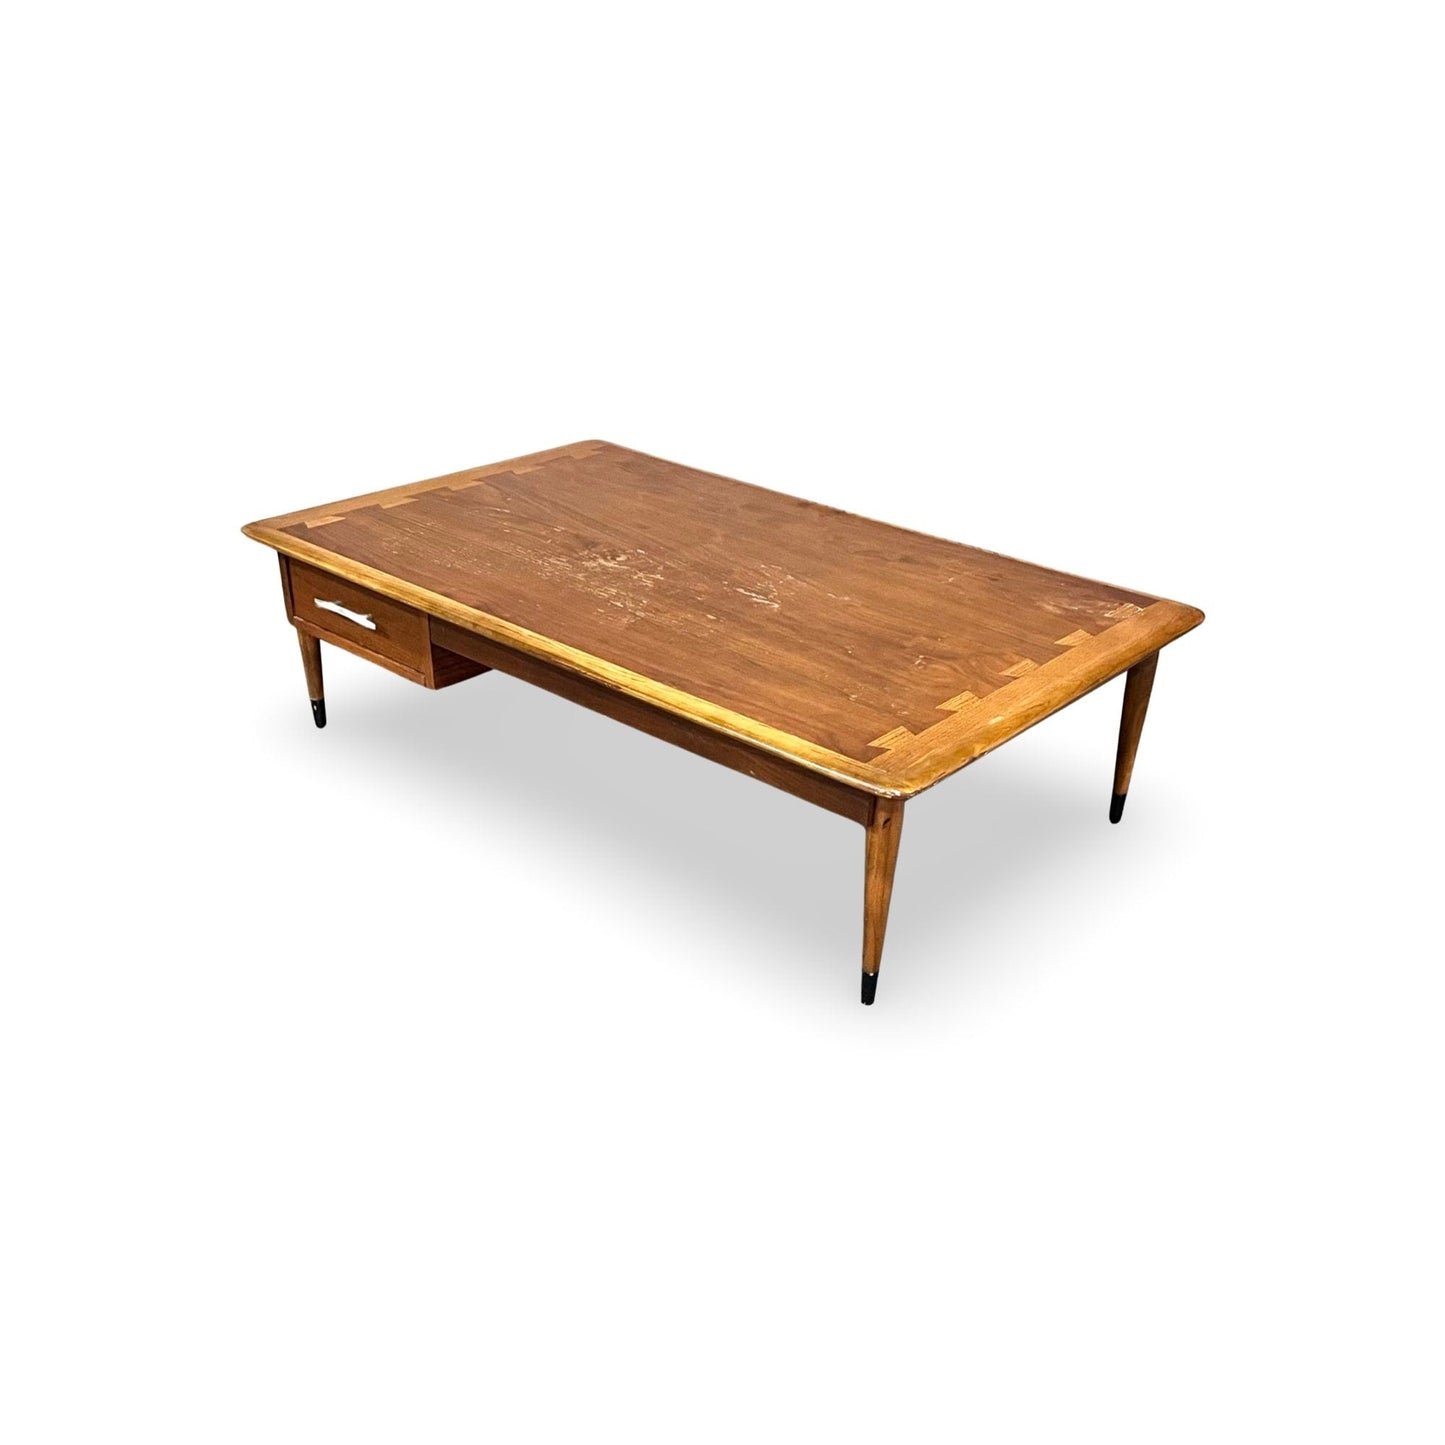 1960s Lane Acclaim walnut coffee table with dovetail detailing.